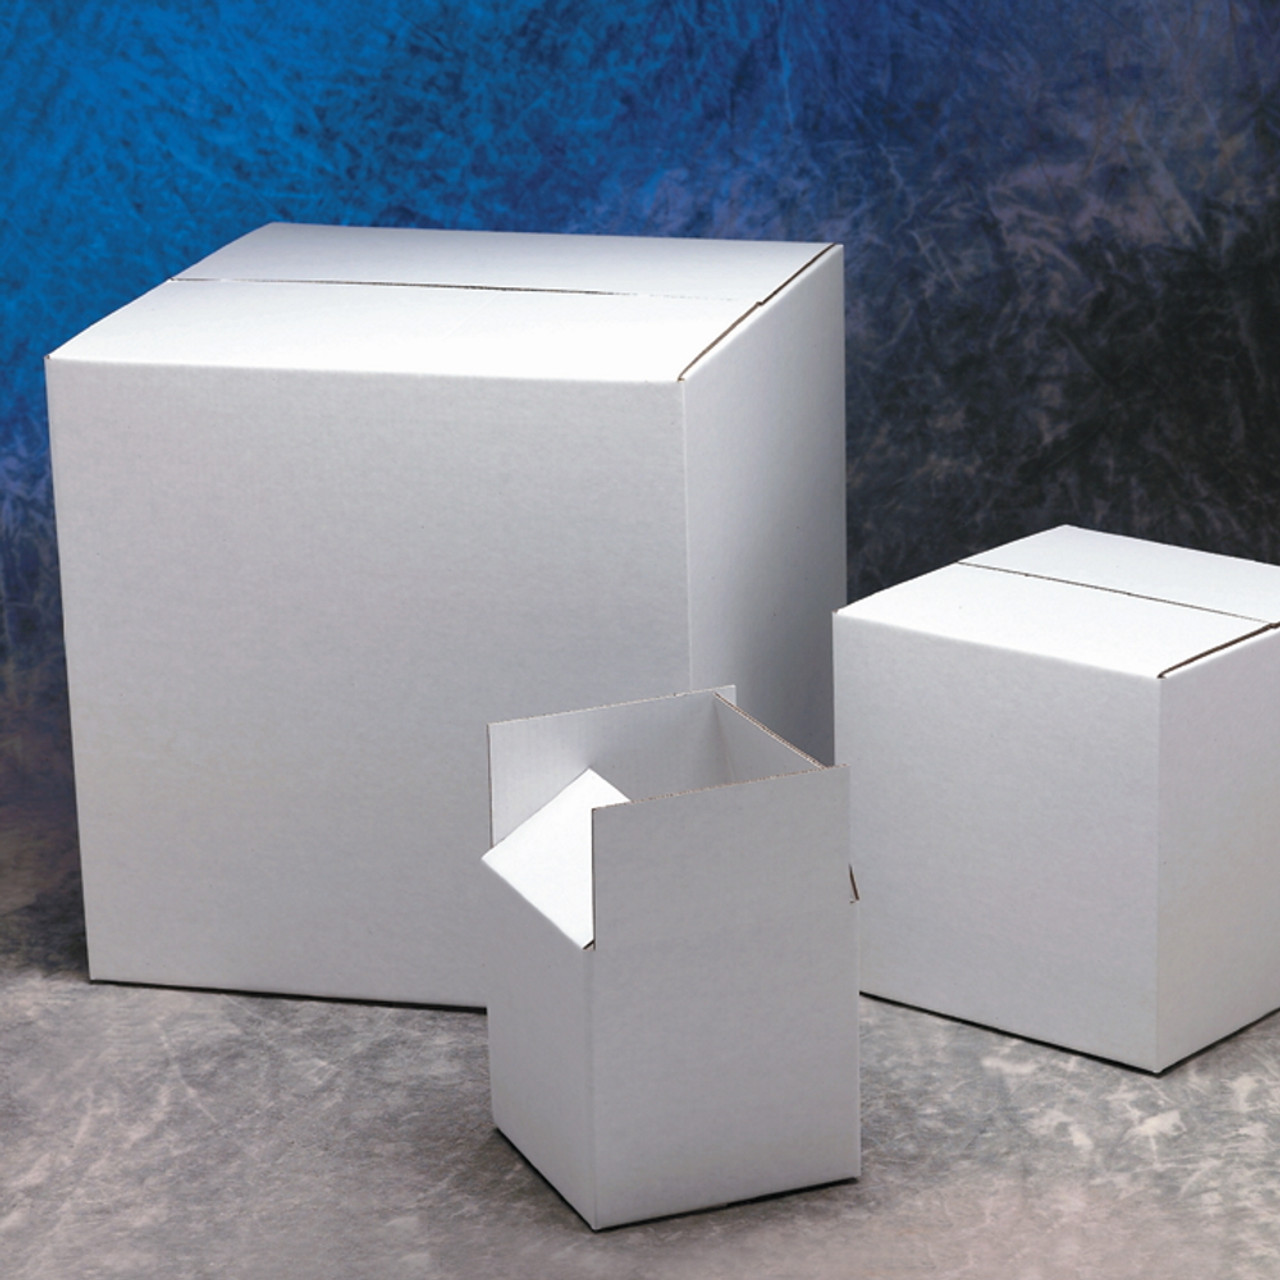 round shipping boxes